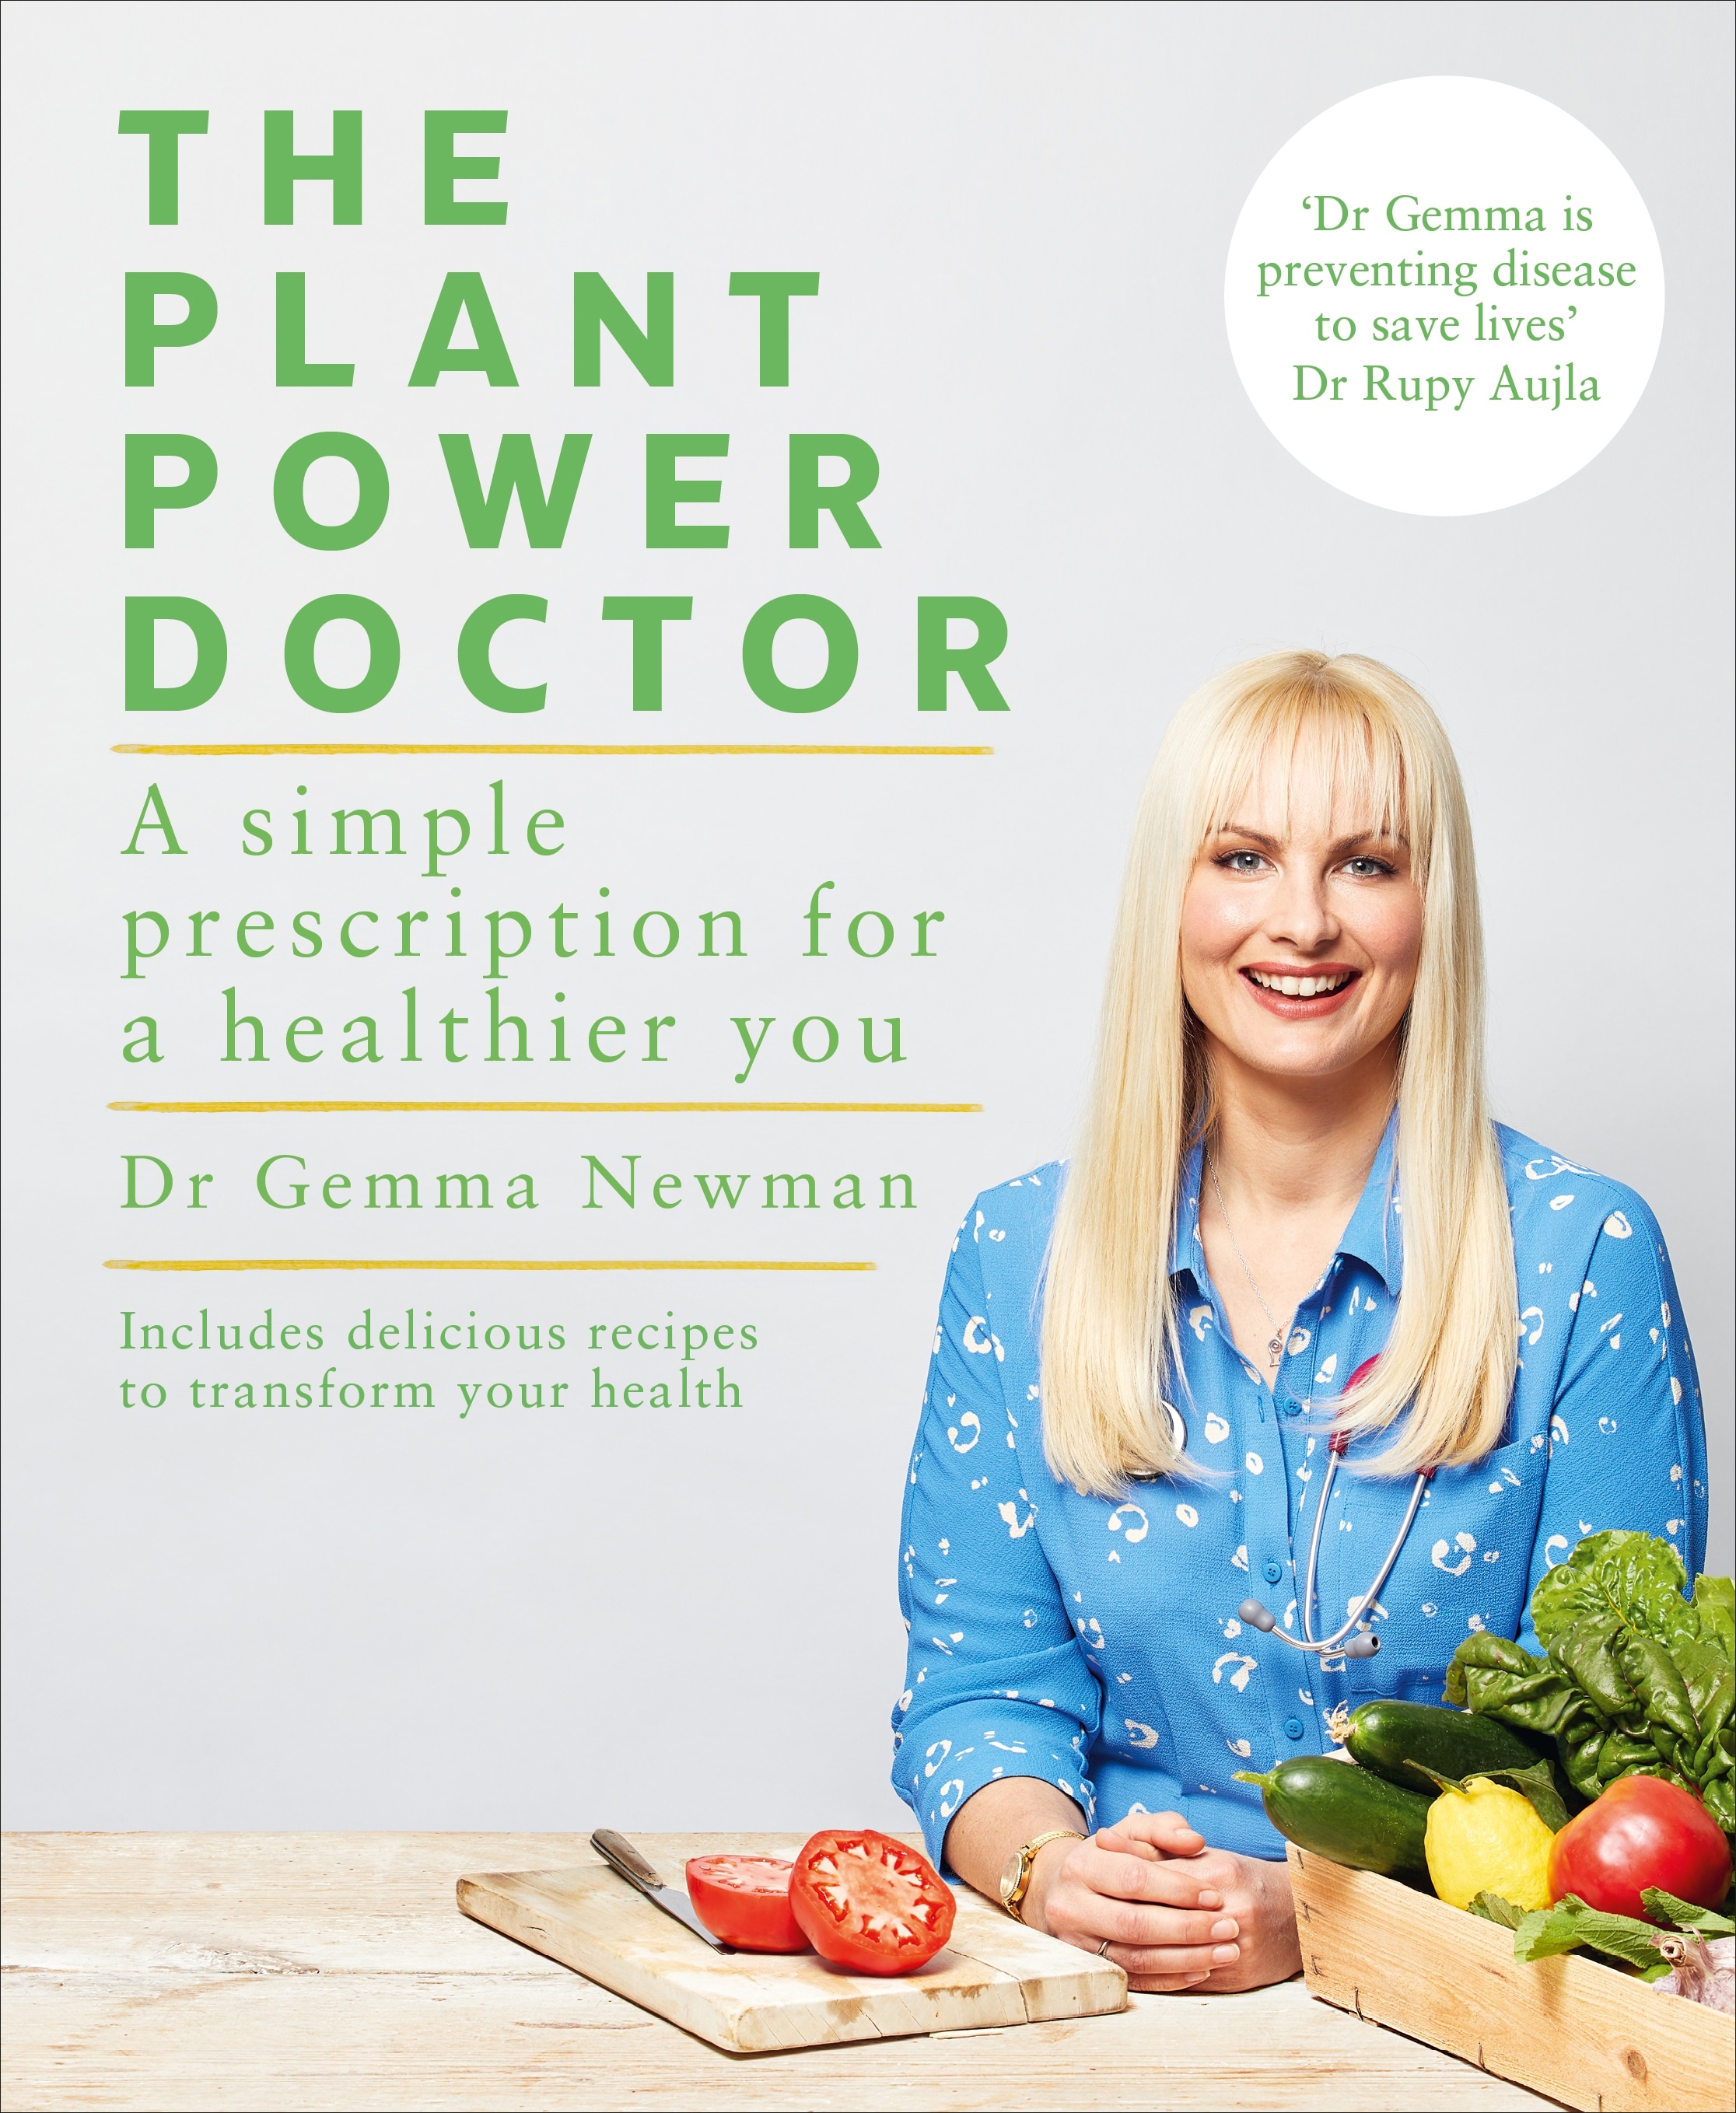 Book “The Plant Power Doctor” by Gemma Newman — January 7, 2021